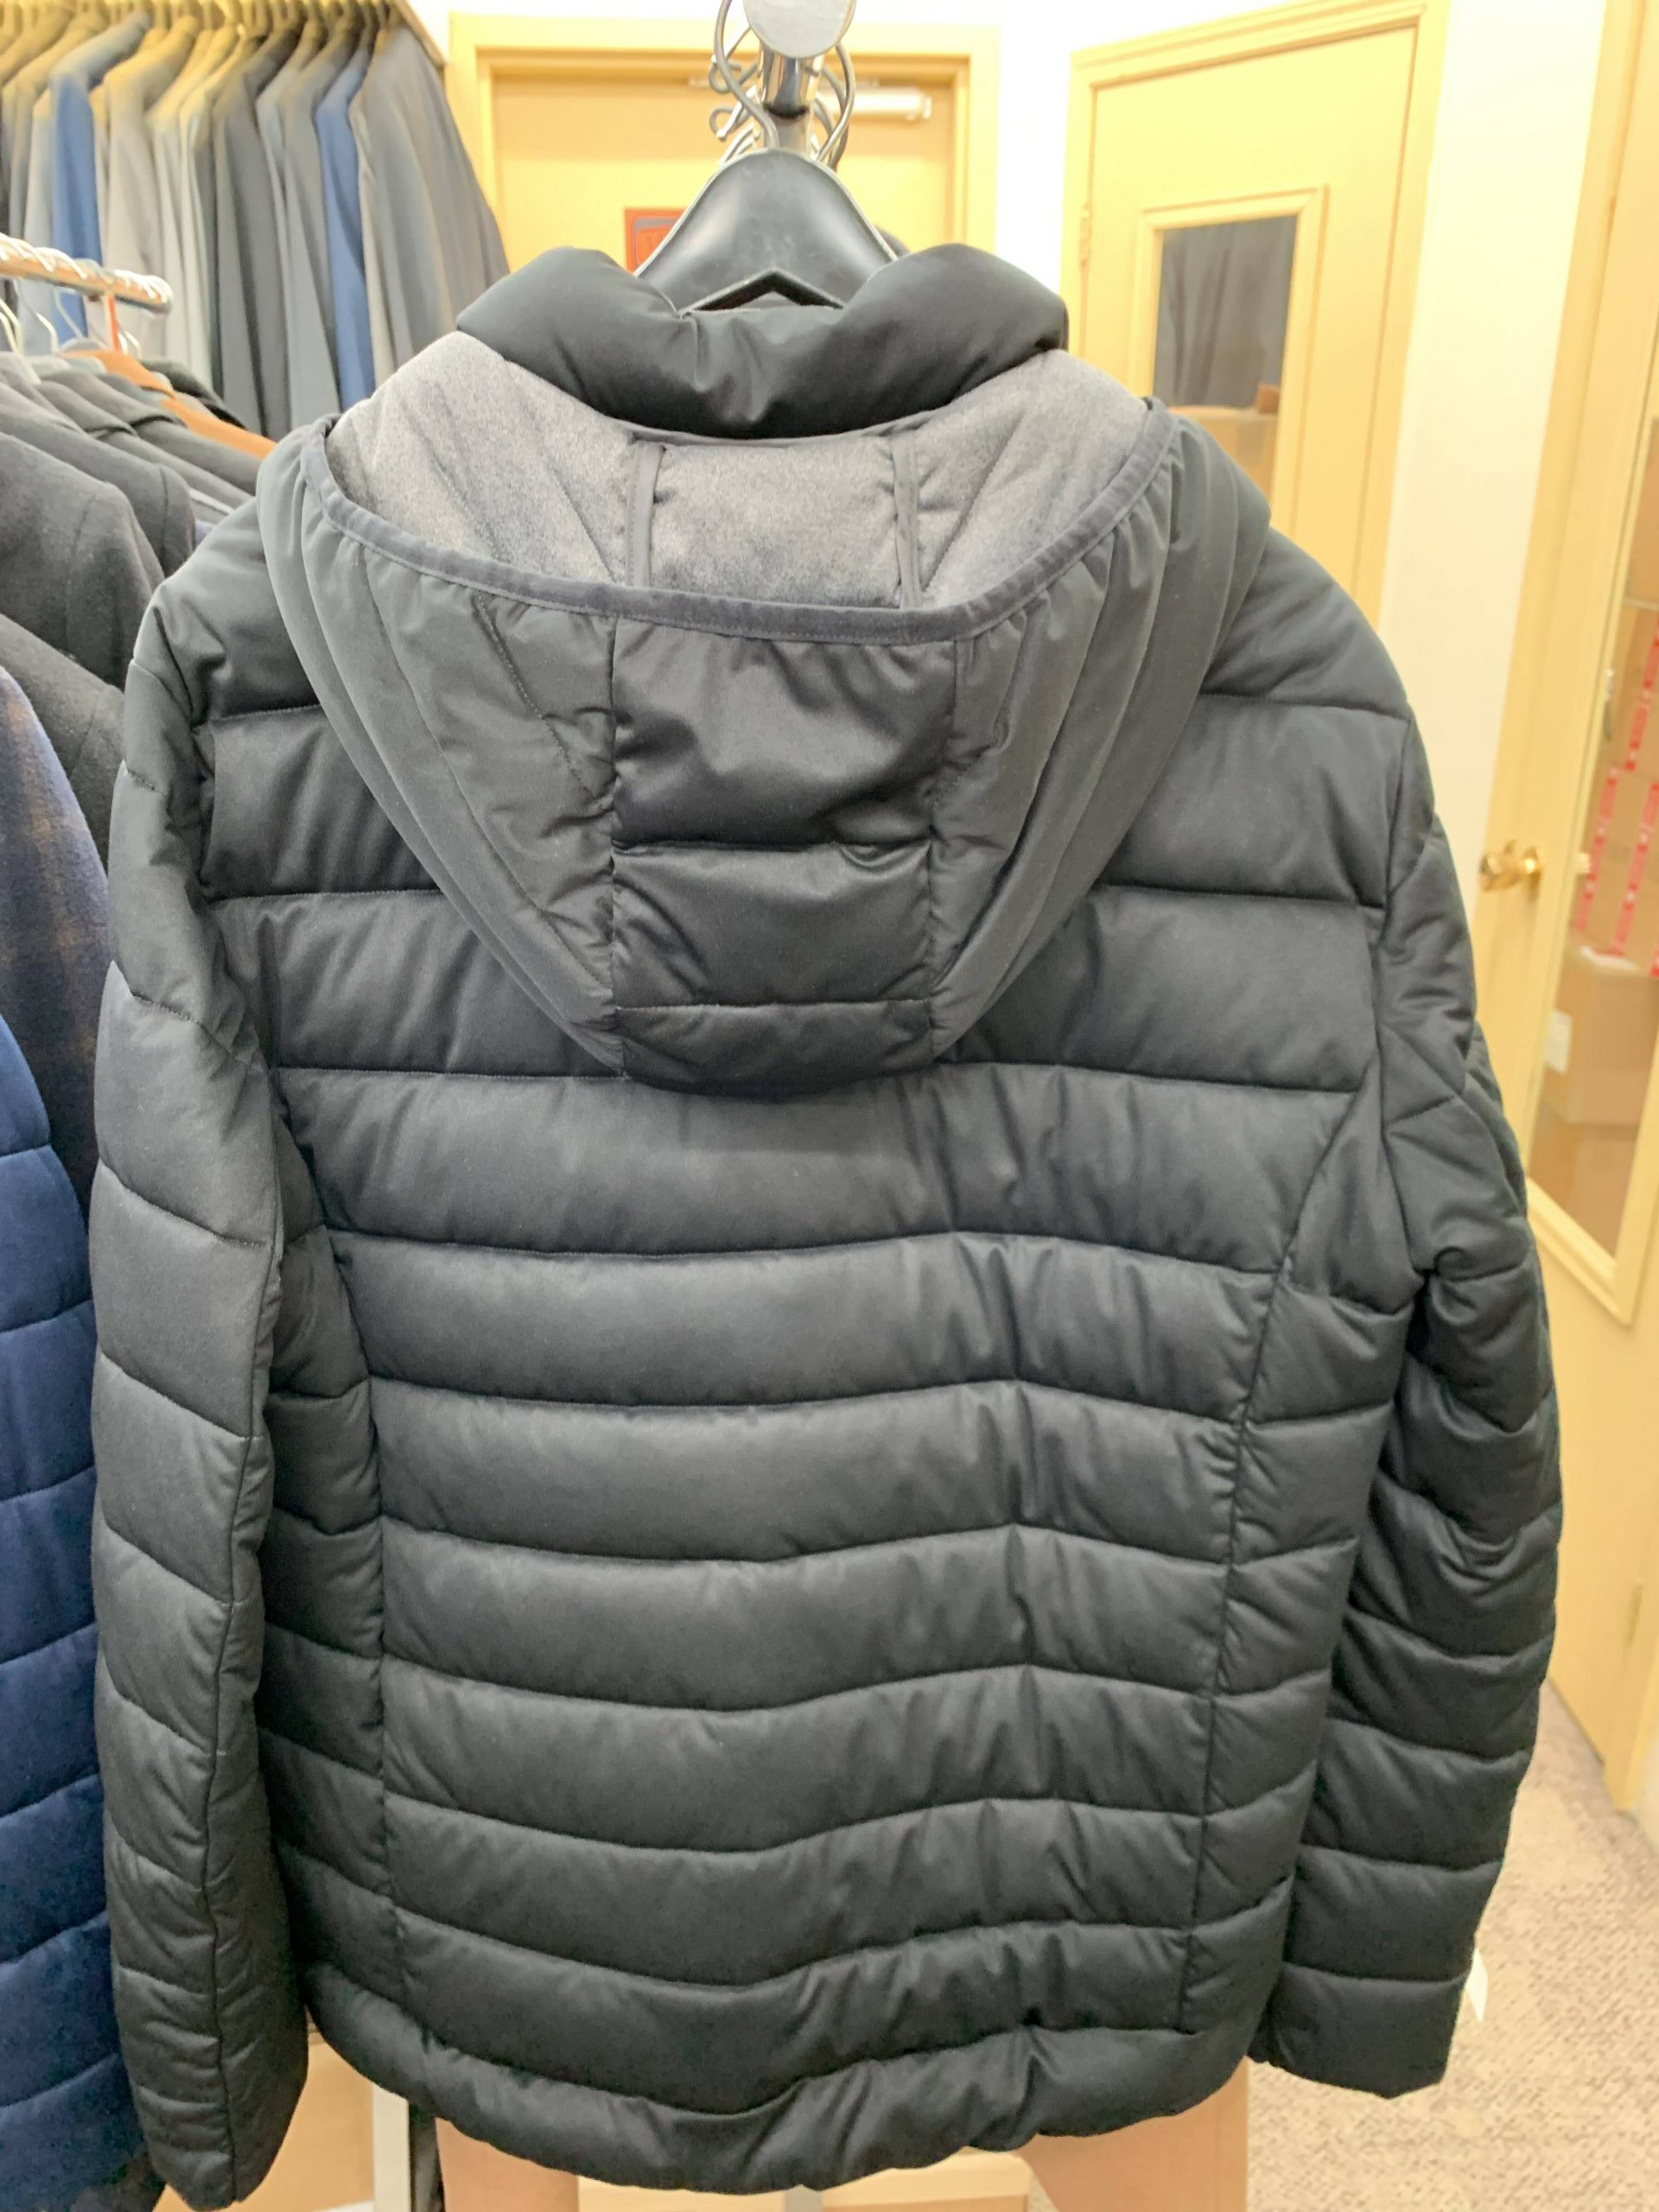 Nuage Quilted Puffer Jacket for Men - Wm. L Chafe & Sons